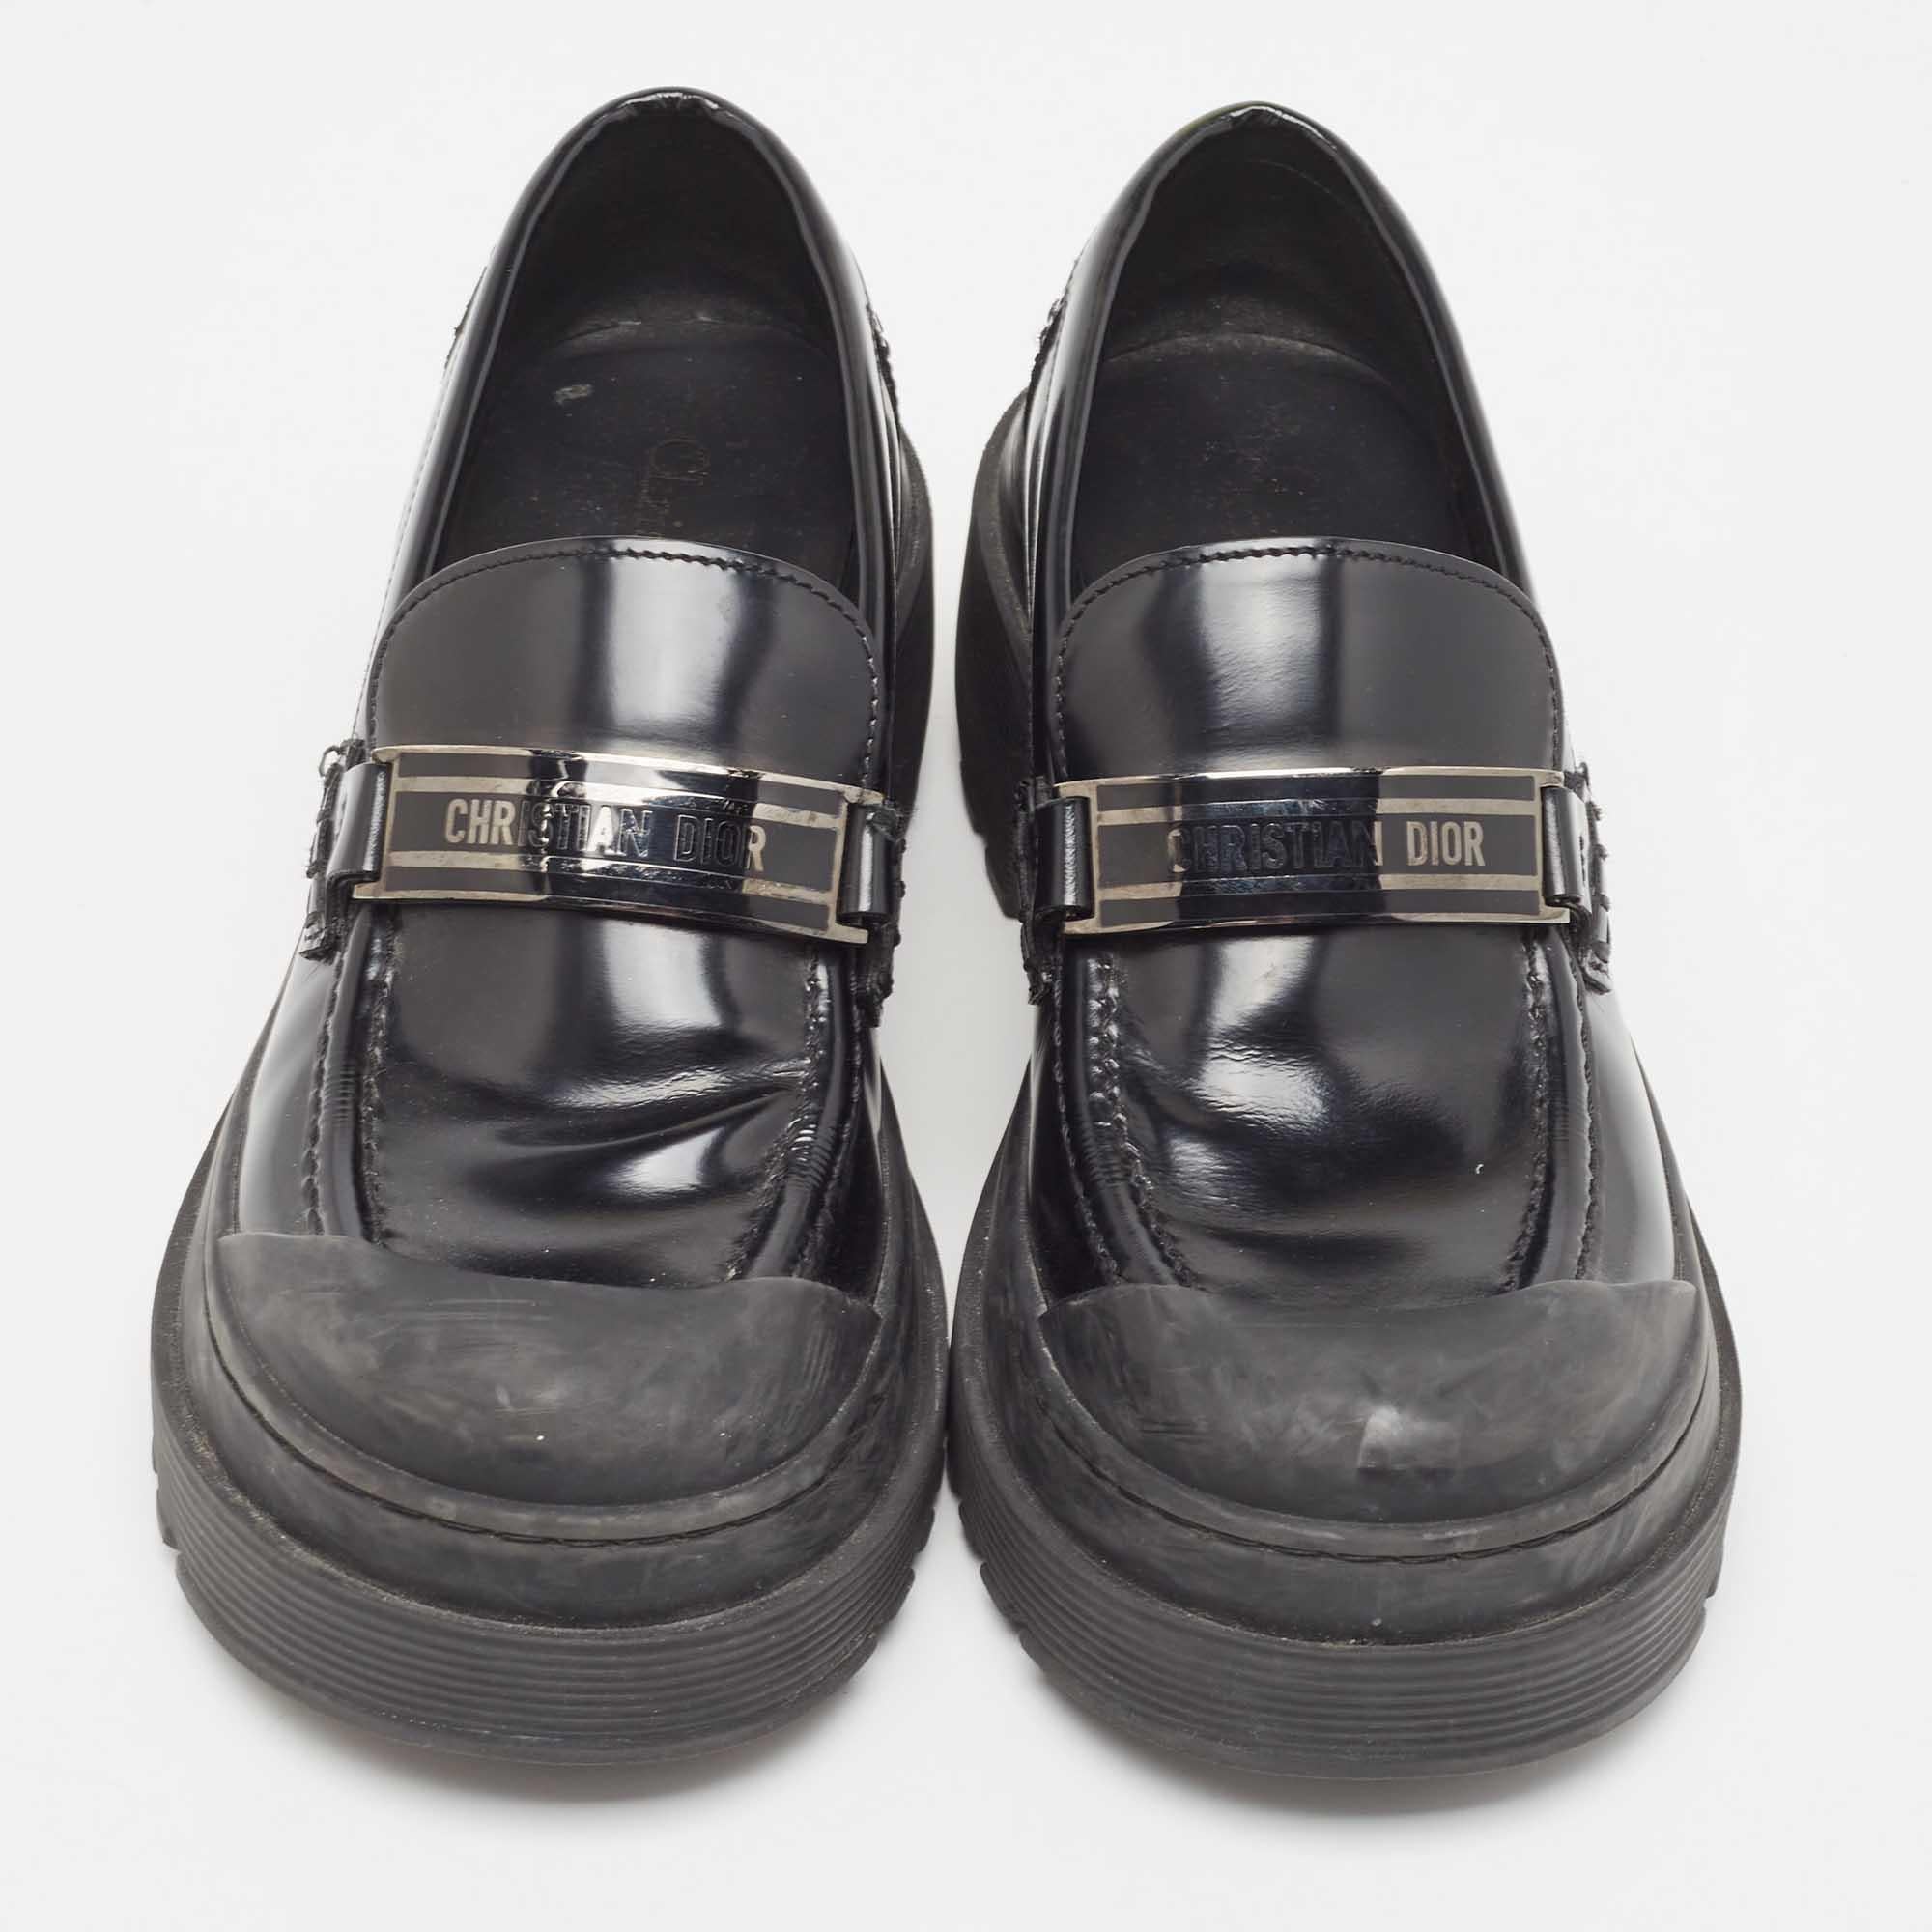 Dior Black Leather Slip On Loafers Size 36 For Sale 1